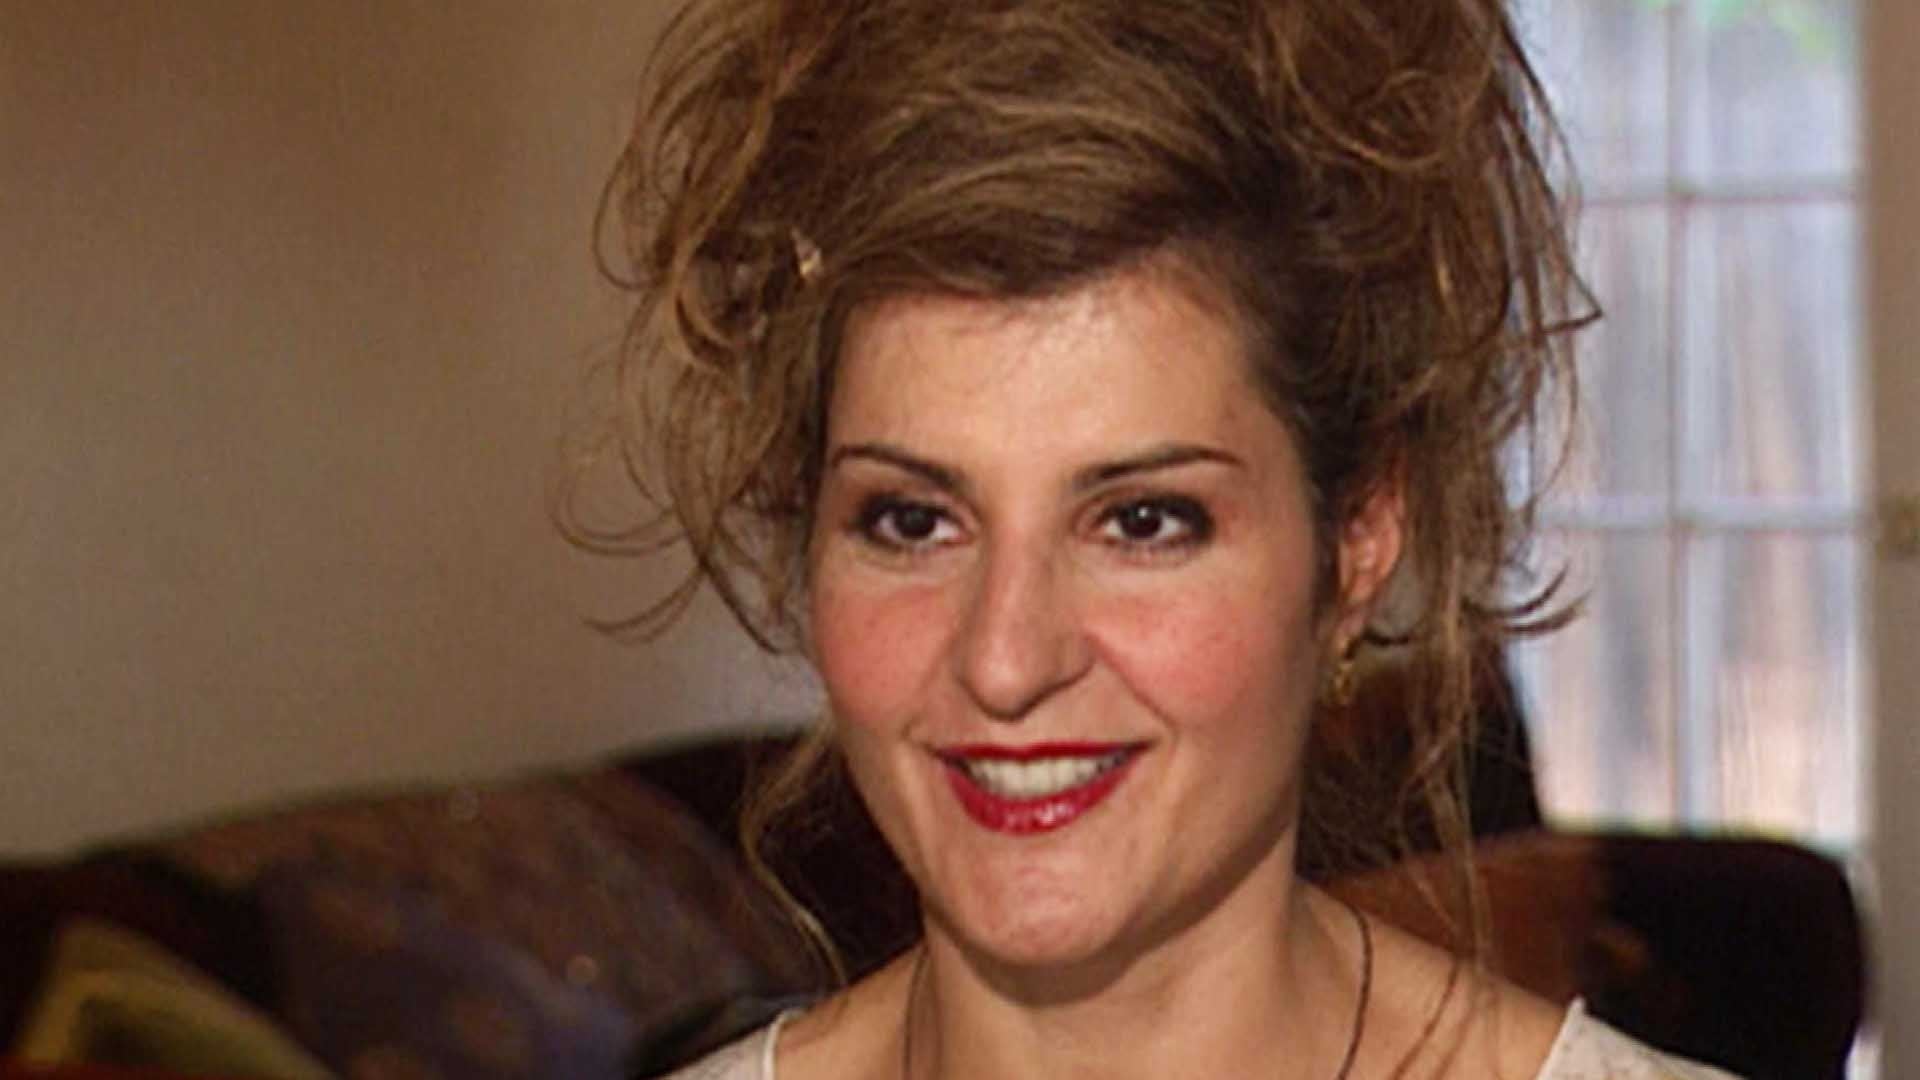 My Big Fat Greek Wedding How Nia Vardalos Turned Her Life Into a Franchise (Exclusive)